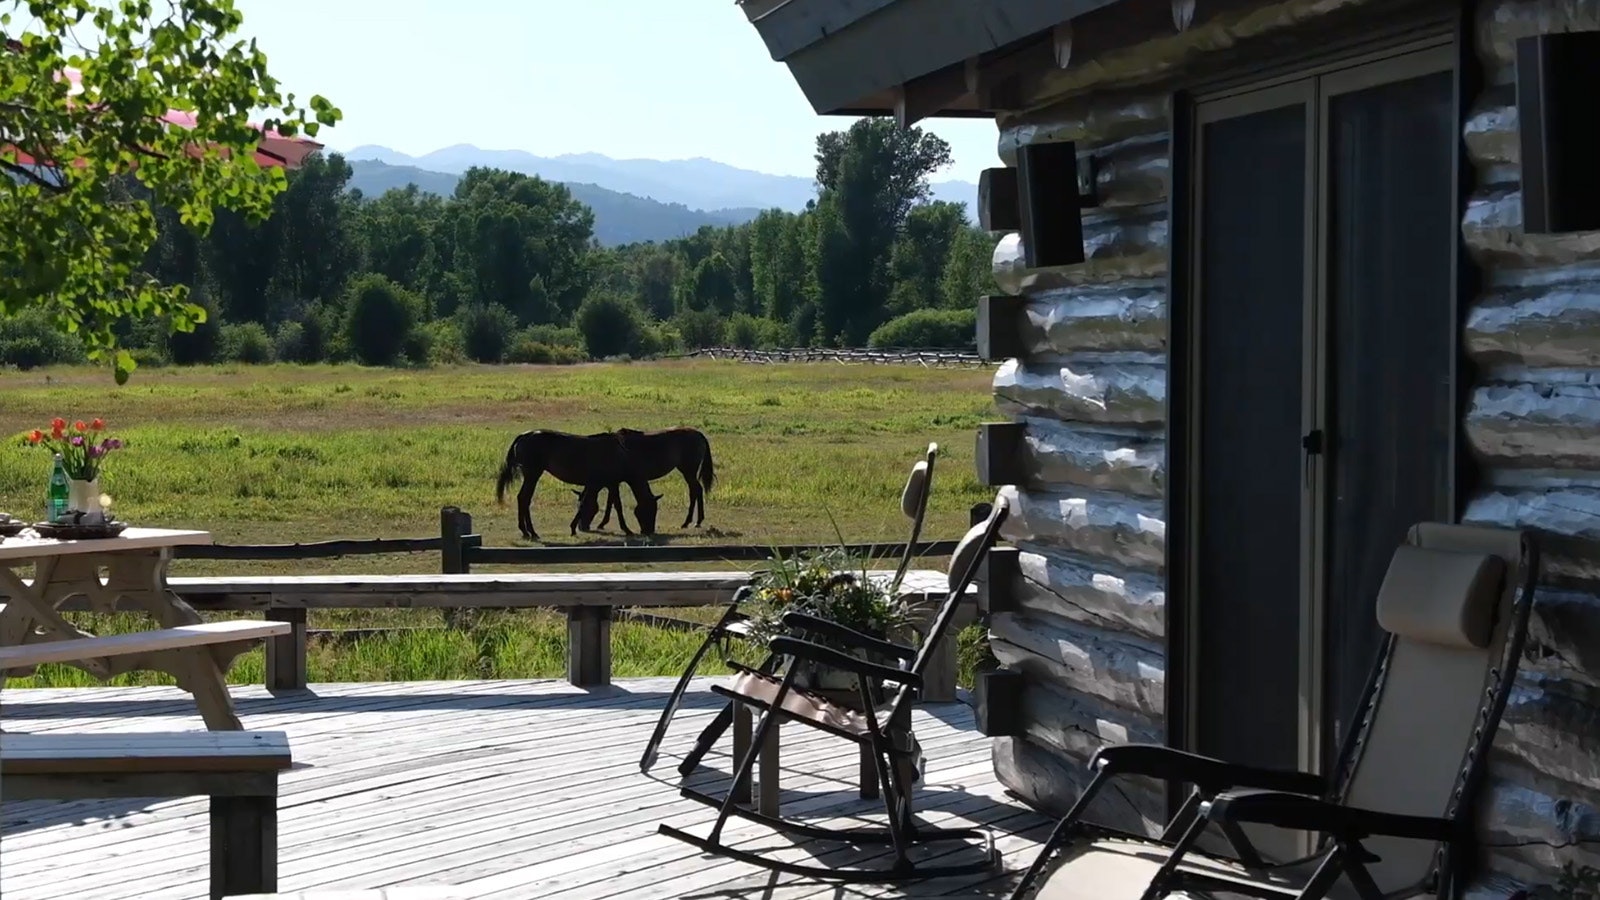 Horse culture is close to the heart of the Western Star Ranch and neighboring properties.